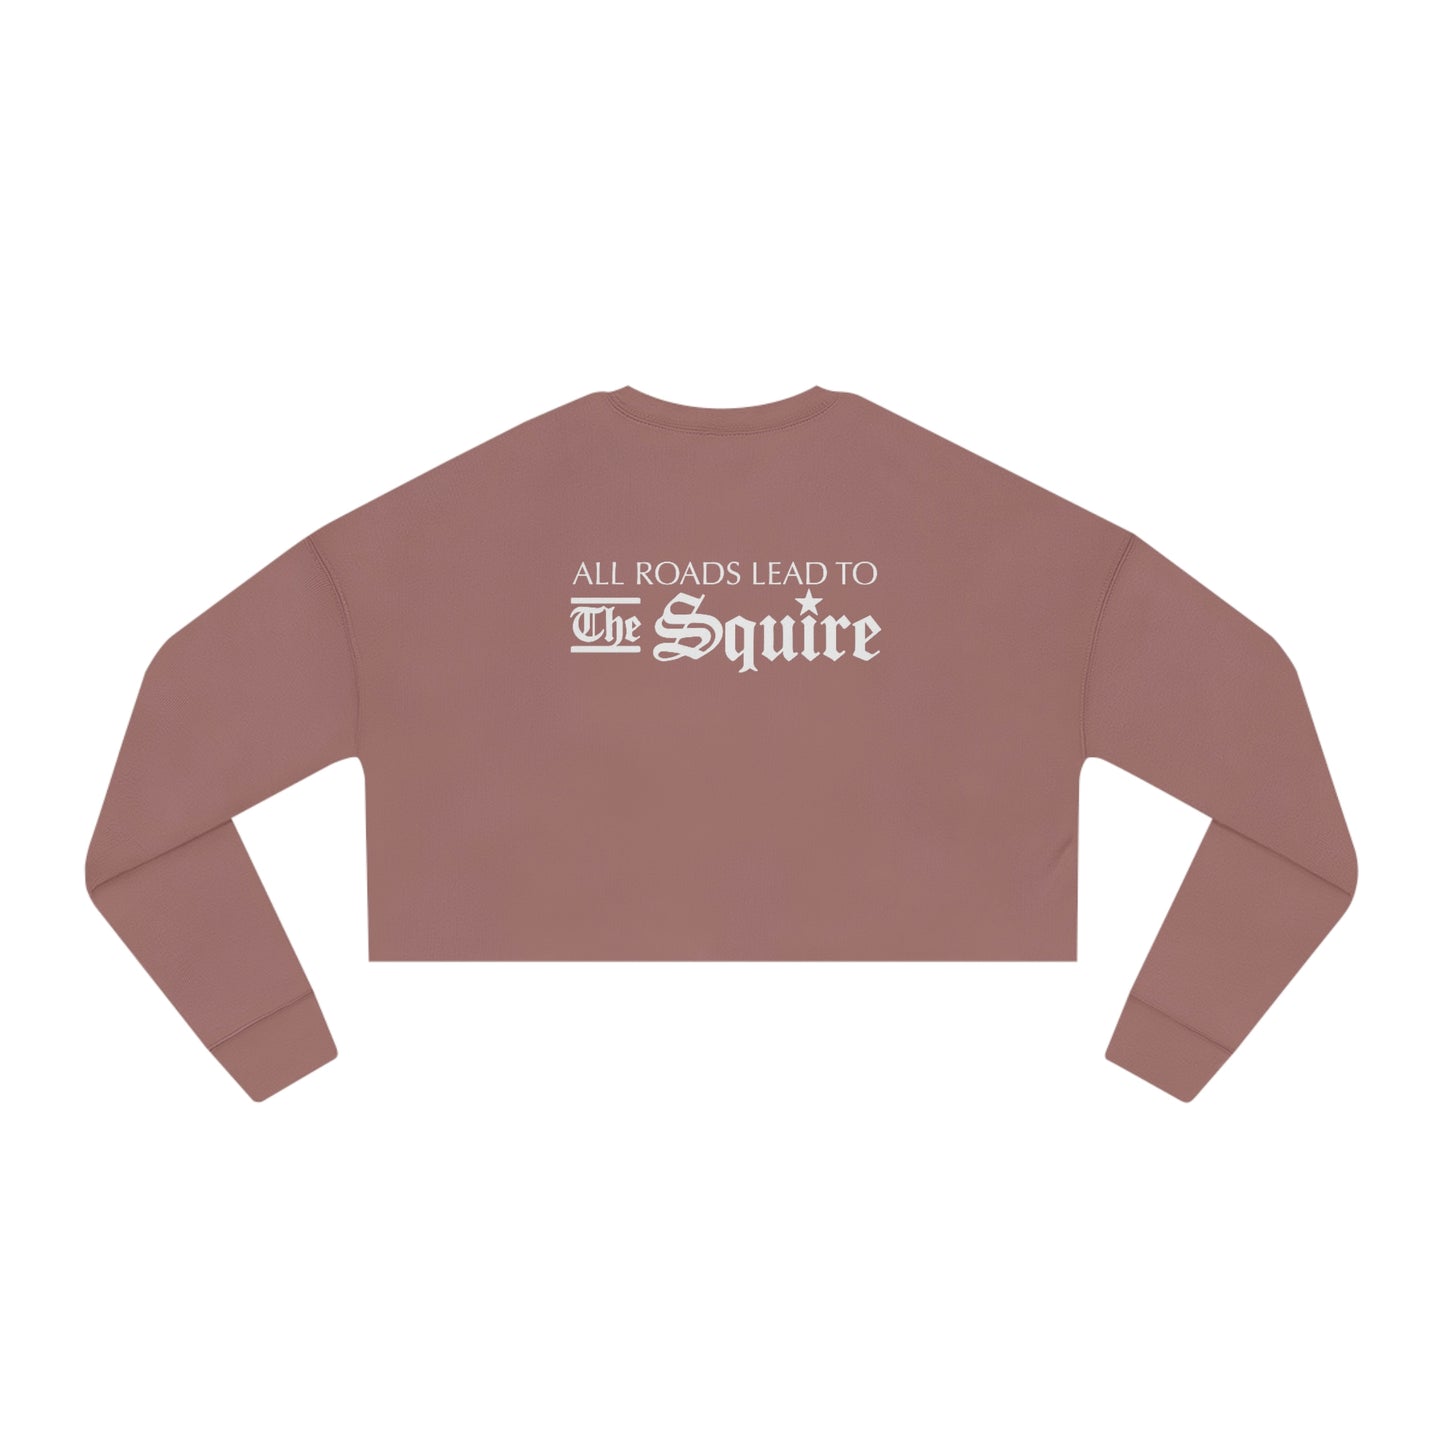 The Squire Women's Cropped Sweatshirt